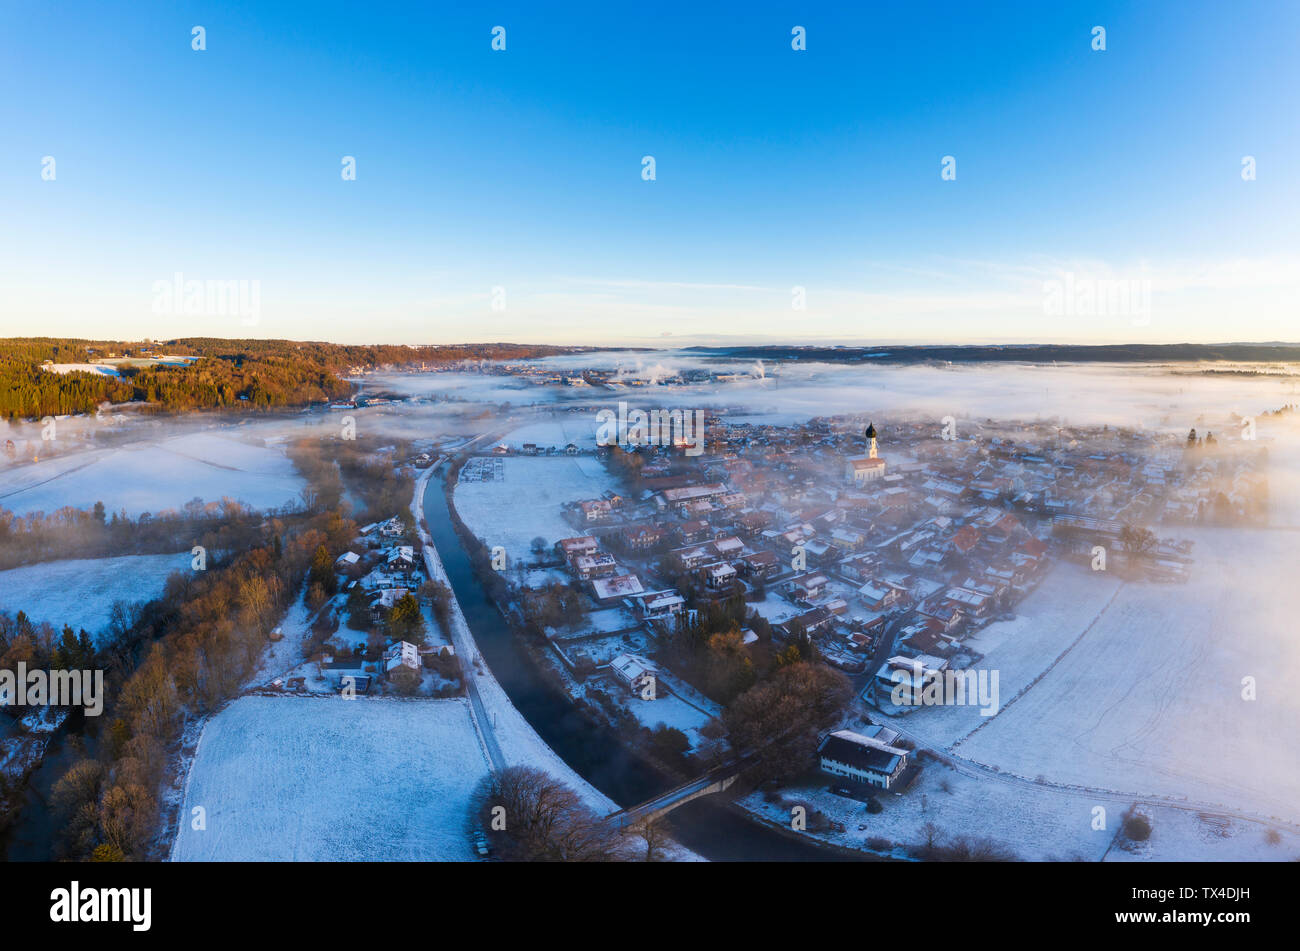 Germany, Bavaria, Gelting and Loisach, morning mood in winter, aerial view Stock Photo